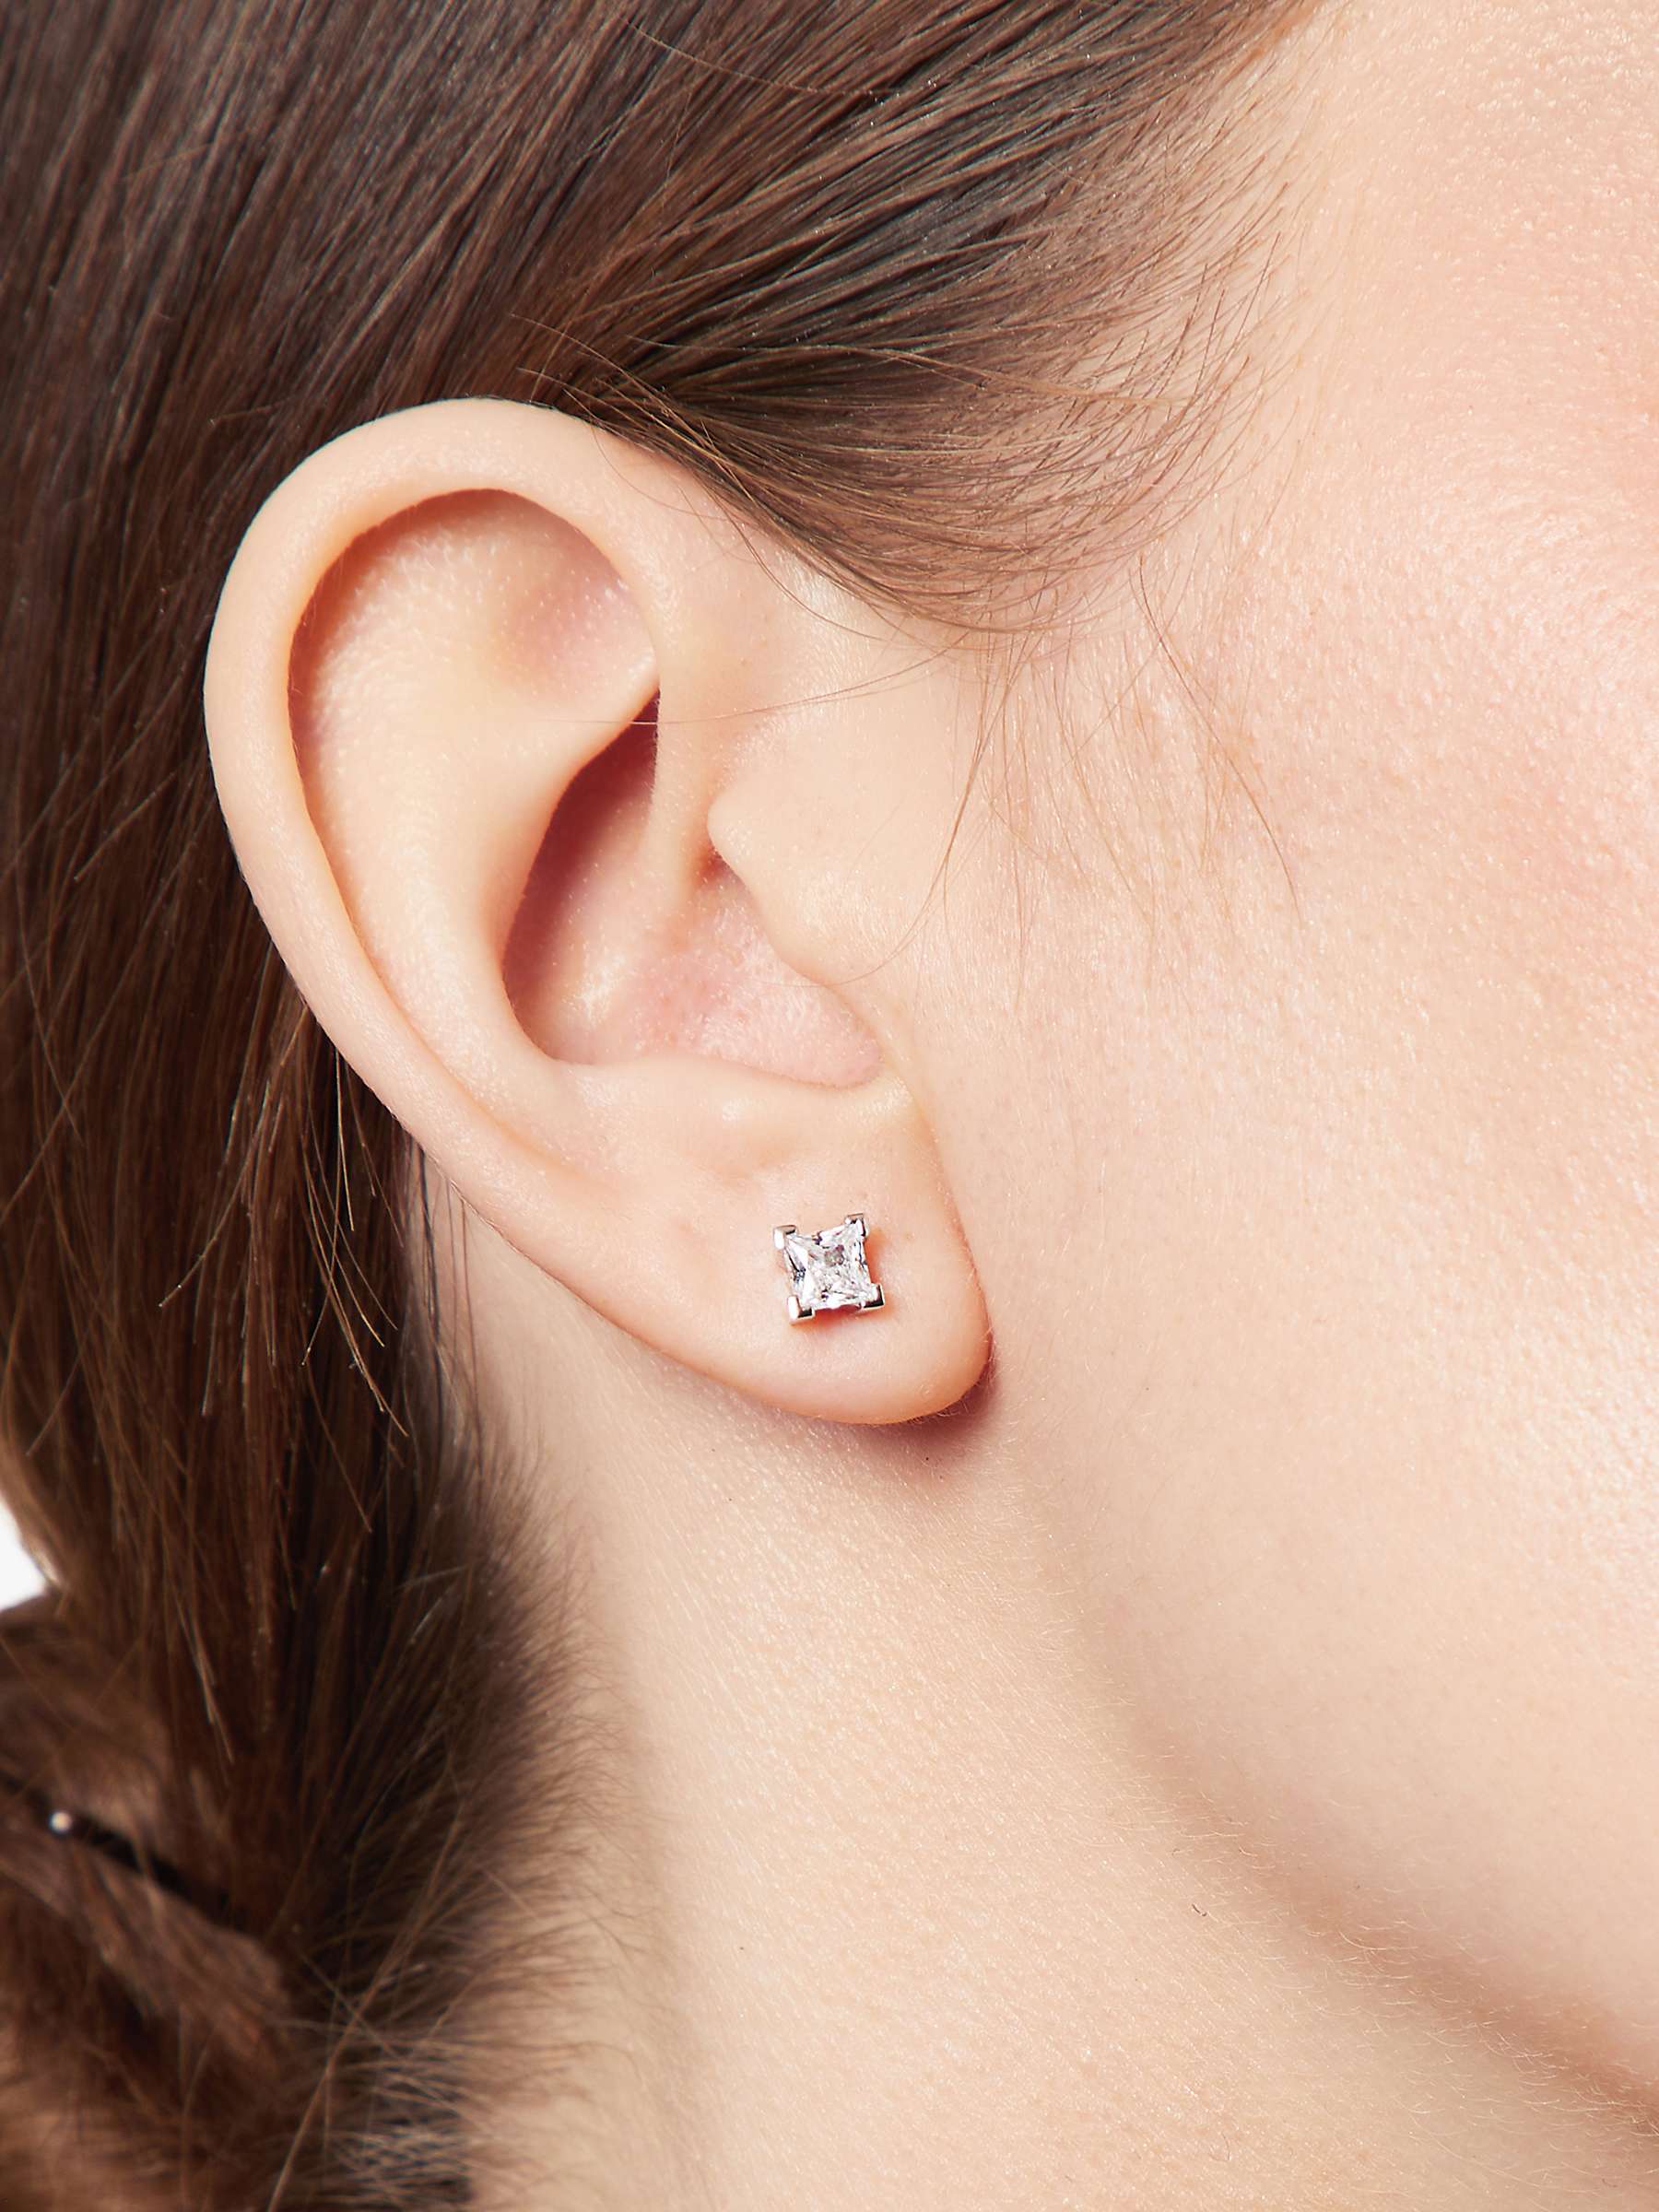 Buy Jools by Jenny Brown Cubic Zirconia Square Stud Earrings, Silver/Clear Online at johnlewis.com